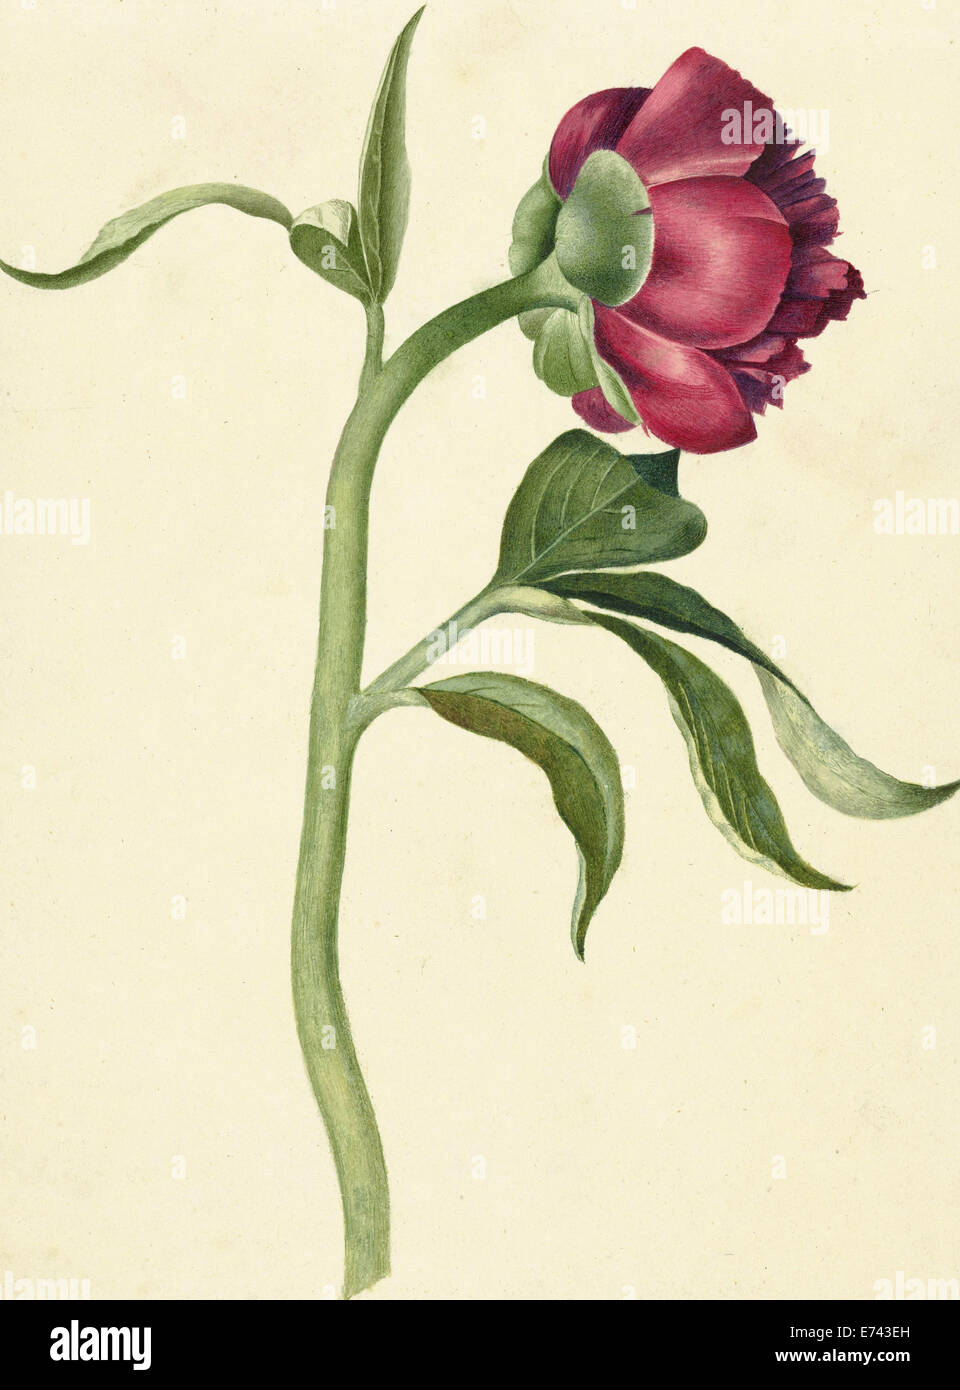 Peony flower - by C. J. Crumb, 1700 - 1800 - Editorial use only. Stock Photo